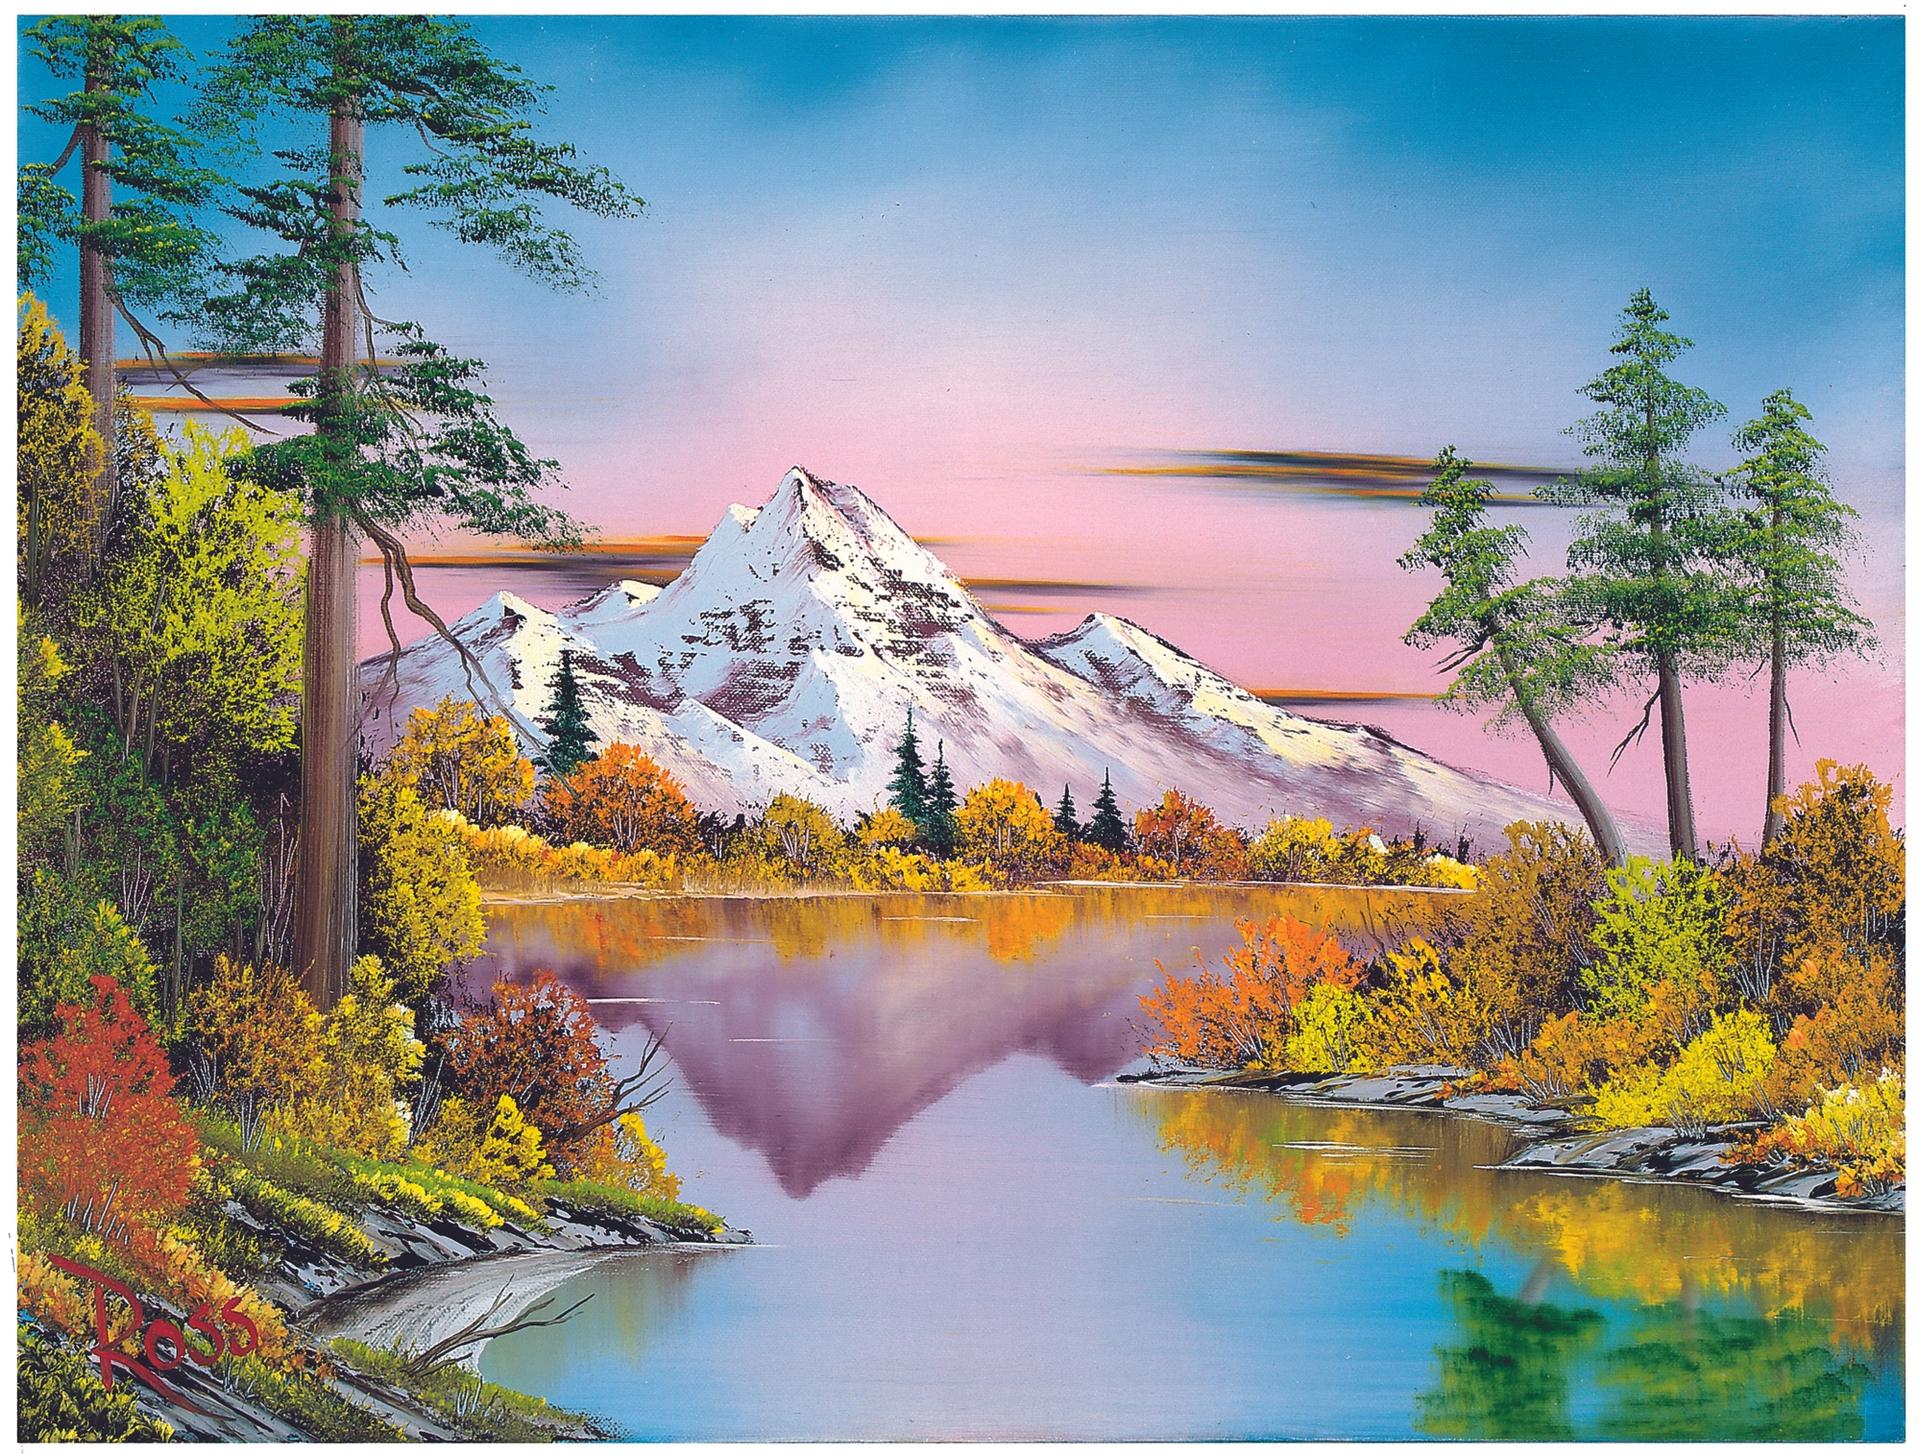 Bob Ross, Reflections (1983) as seen on The Joy of Painting, Season 2, Episode 8 ® Bob Ross name and images are registered trademarks of Bob Ross Inc. © Bob Ross Inc. used with permission